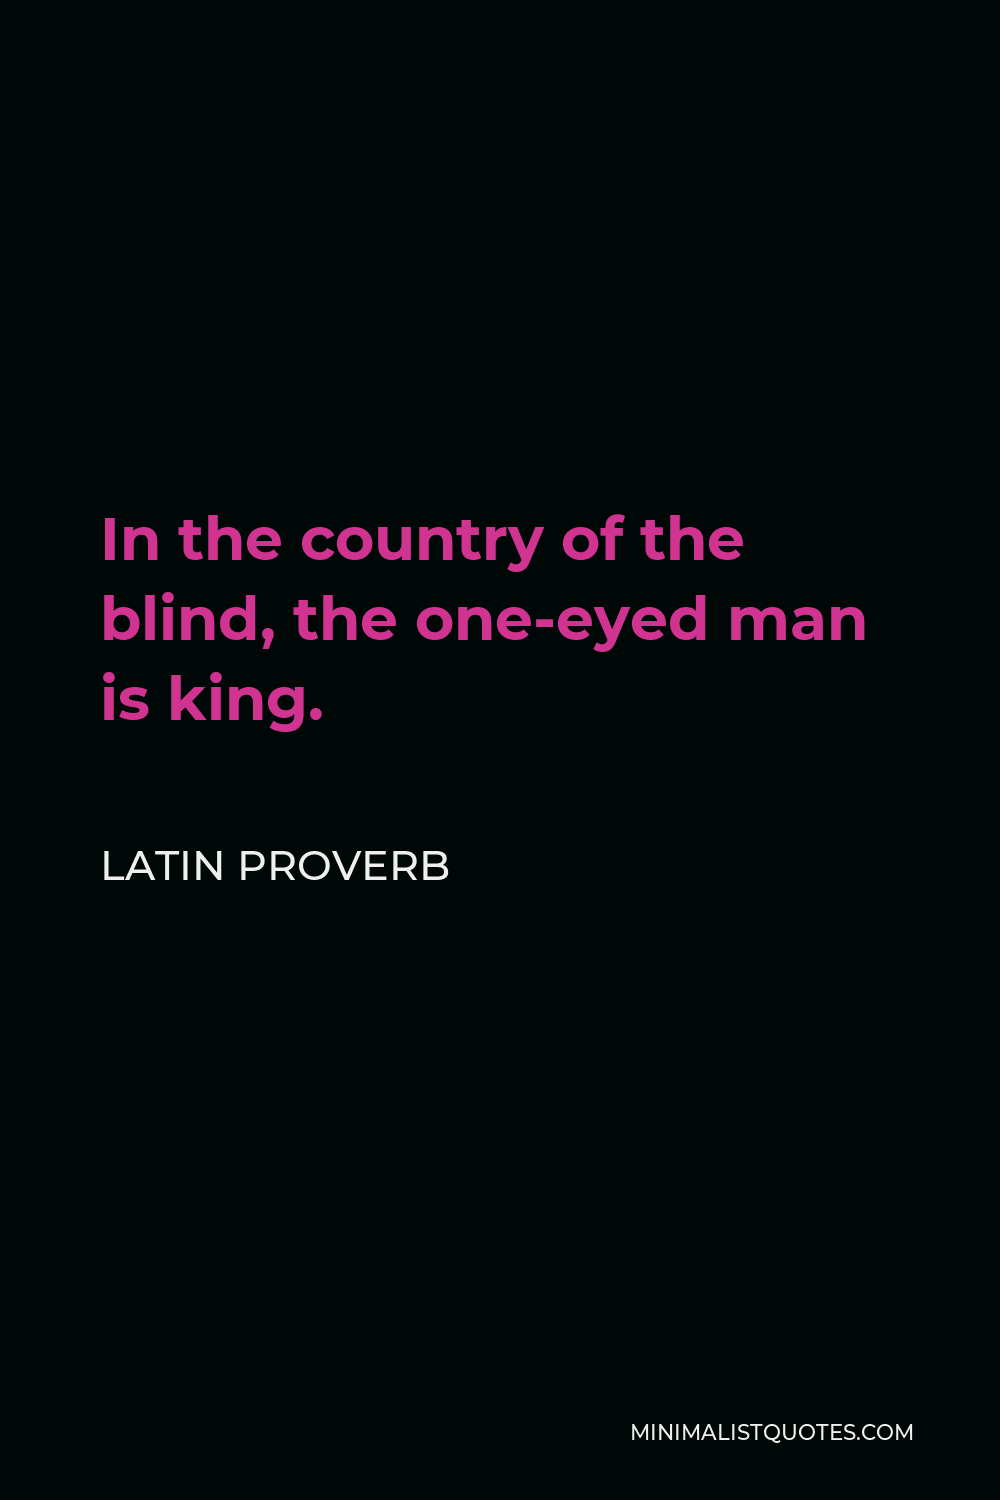 Latin Proverb Quote - In the country of the blind, the one-eyed man is king.